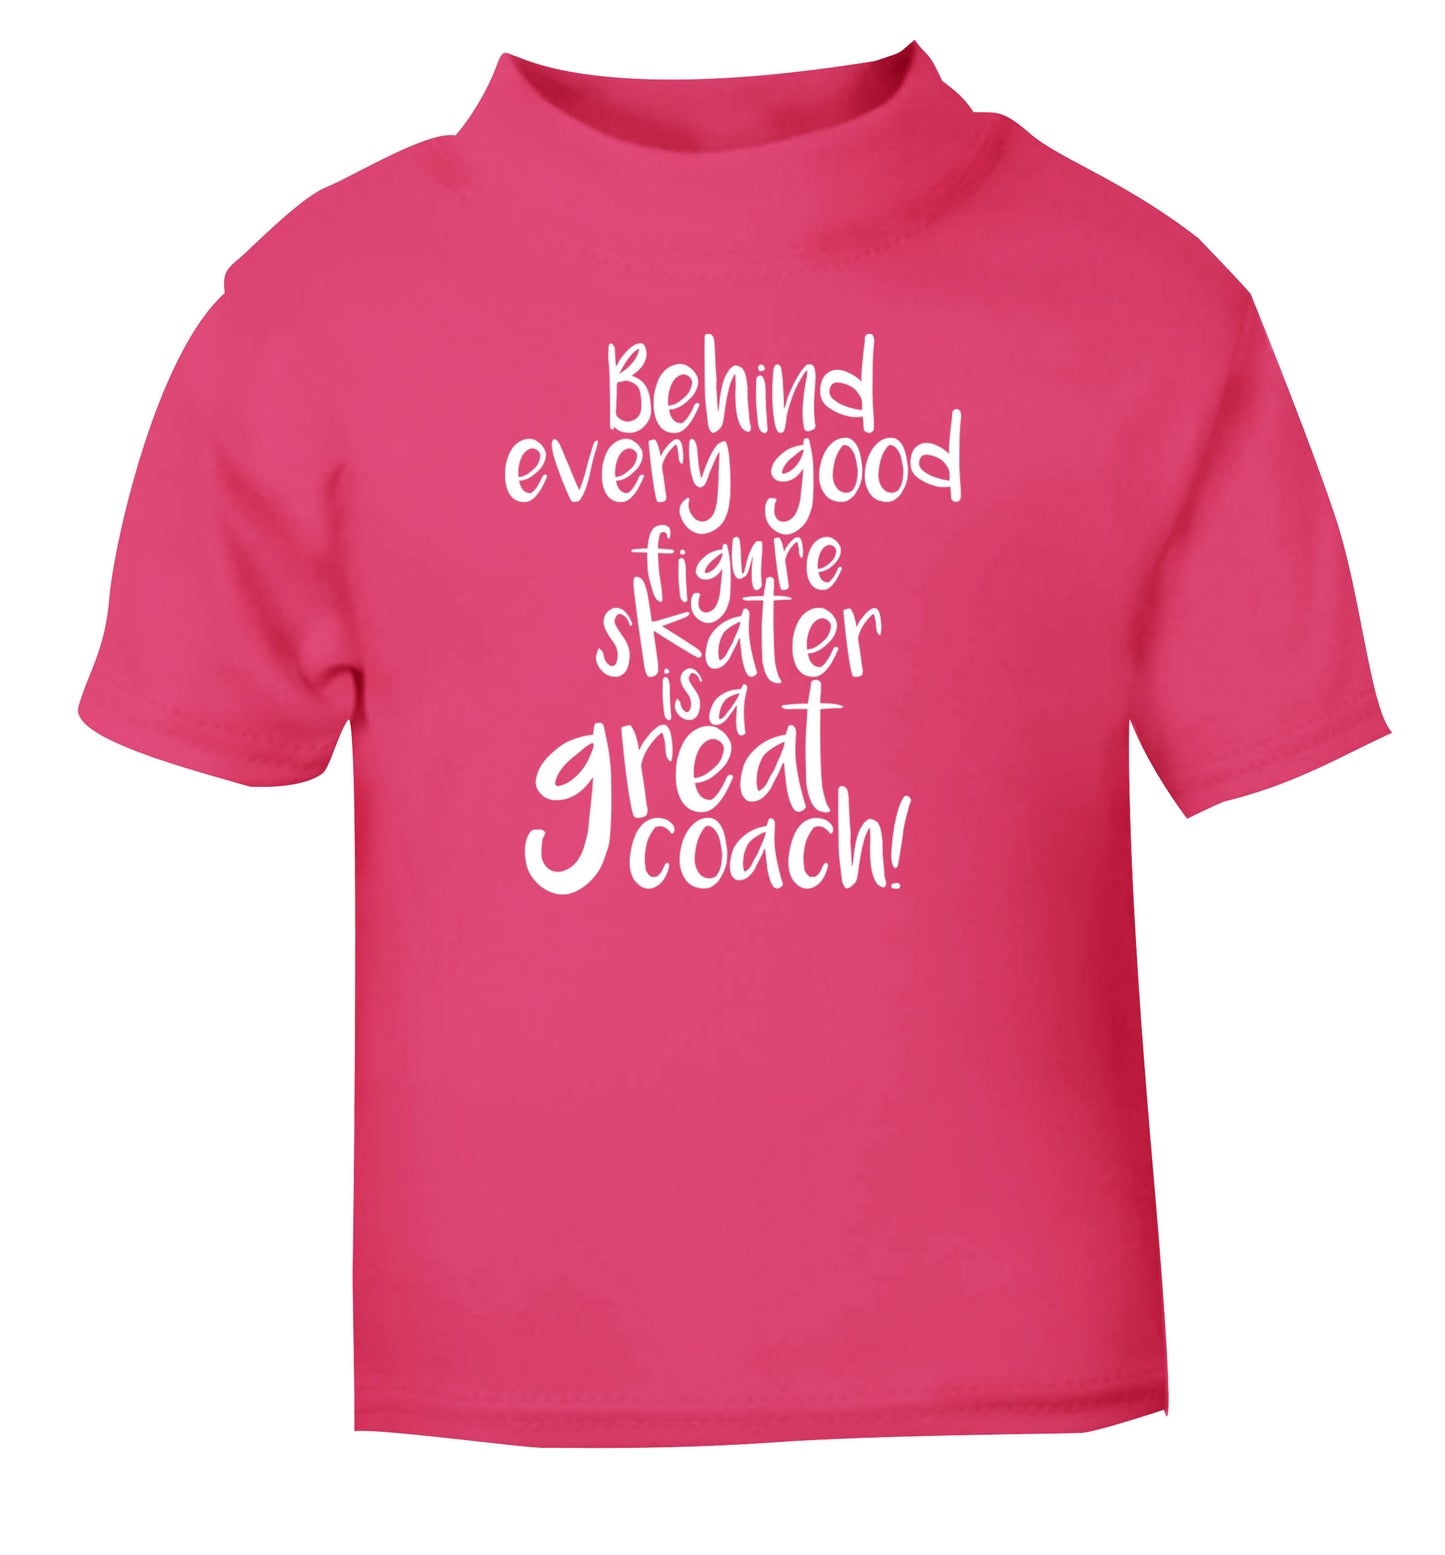 Behind every good figure skater is a great coach pink Baby Toddler Tshirt 2 Years